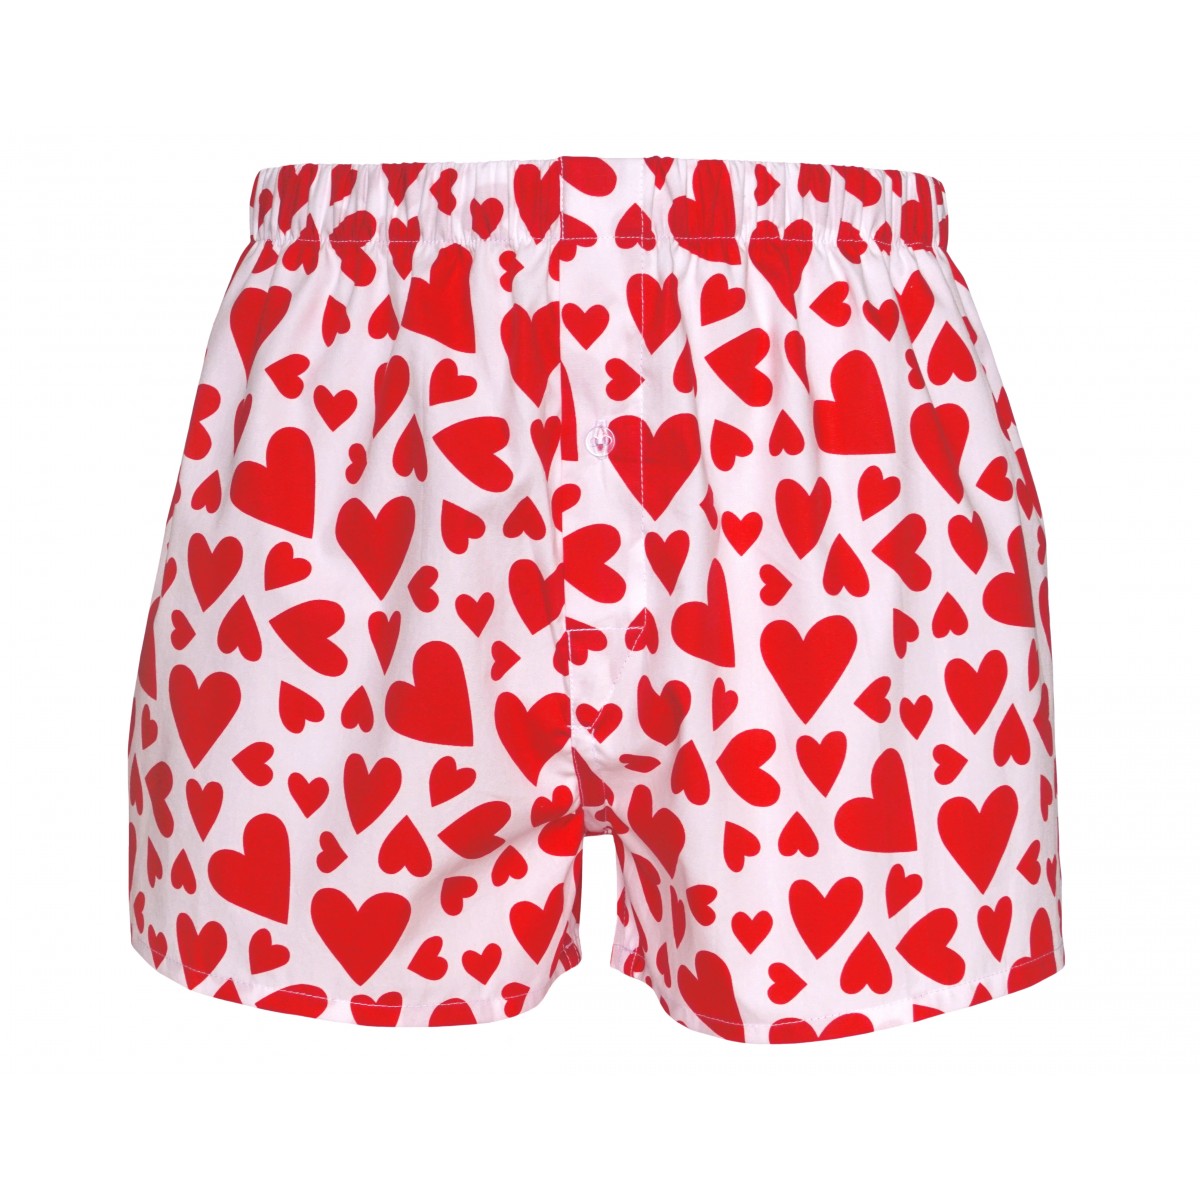 295 Shorts Boxers Heart Images, Stock Photos, 3D objects, & Vectors